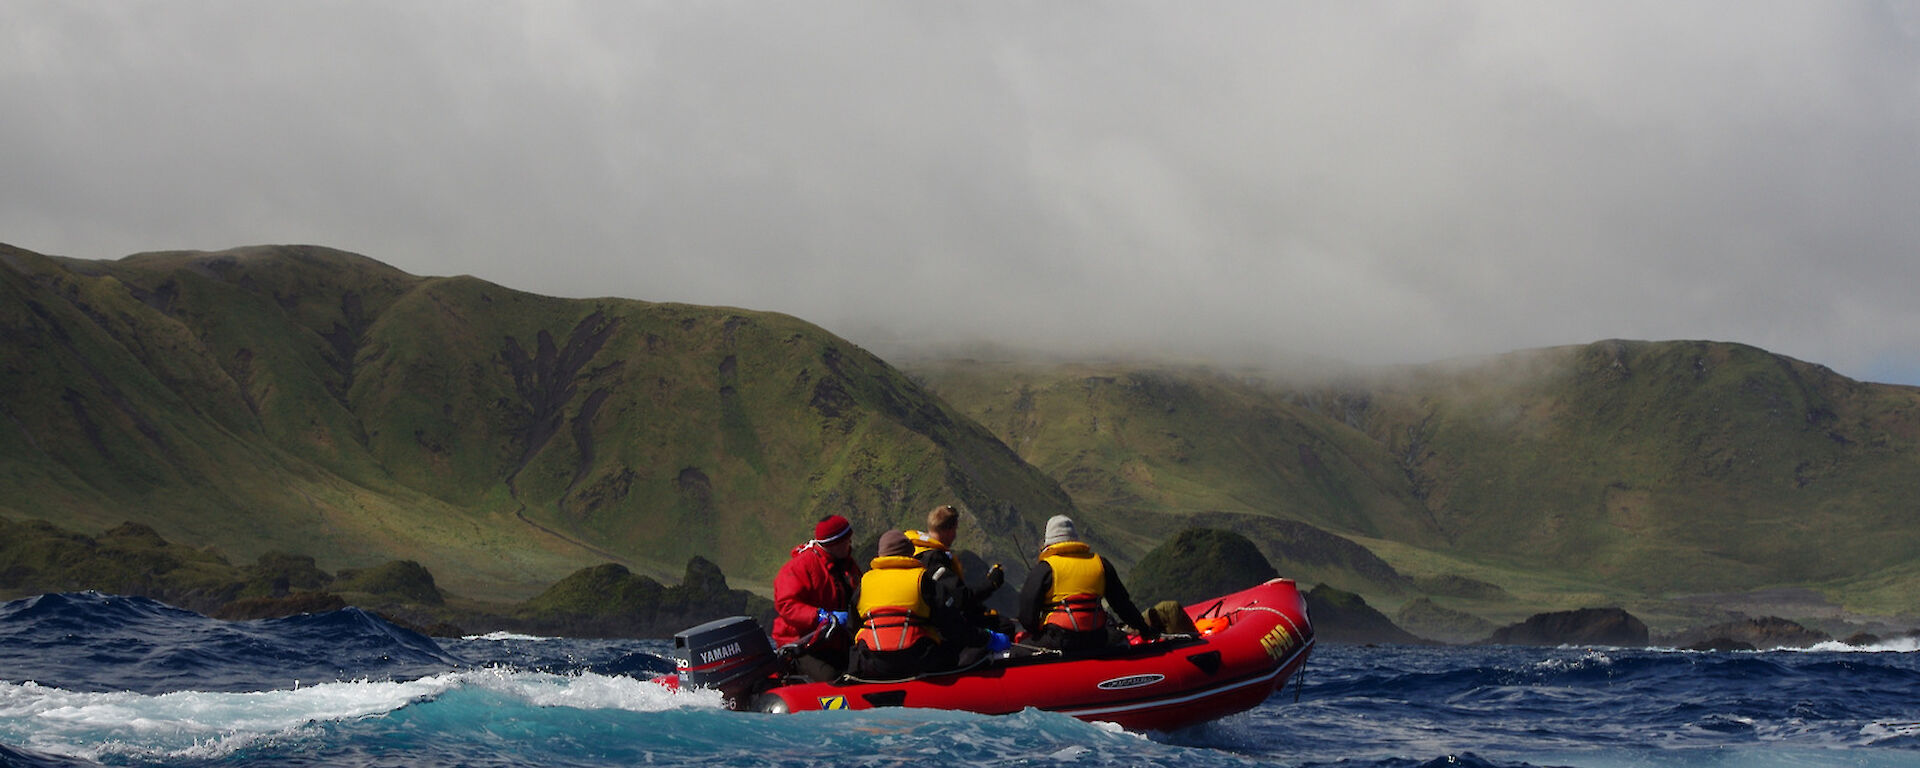 Cruising down the west coast. Image taken from an IRB with one of the other IRB’s in the foreground with four people on board. The rugged coast and green slopes of the escarpment are in the background